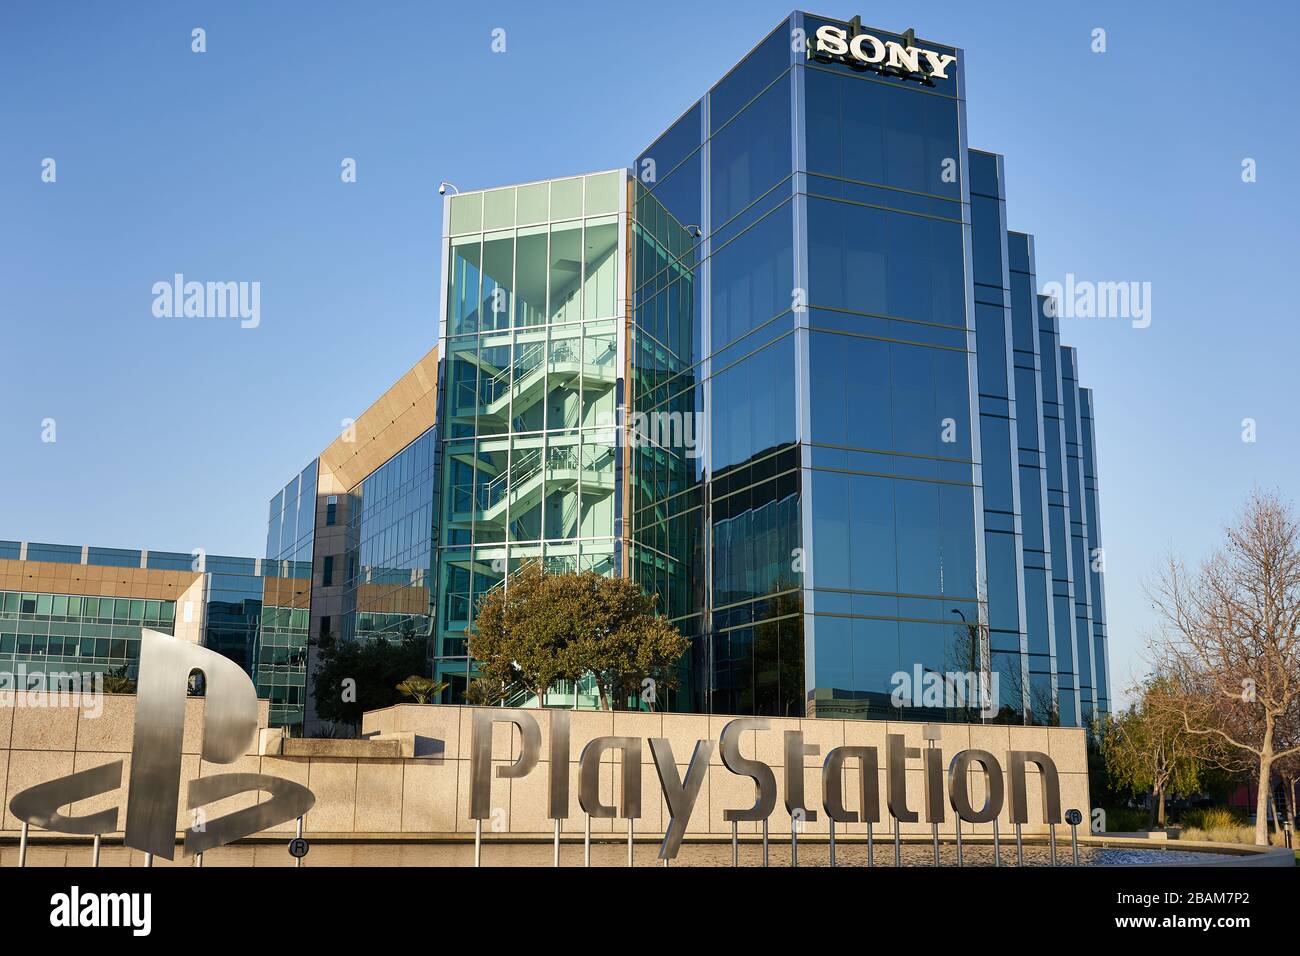 The Sony PlayStation logo is seen at Sony Interactive Entertainment Headquarters in San Mateo, California, United States. Stock Photo